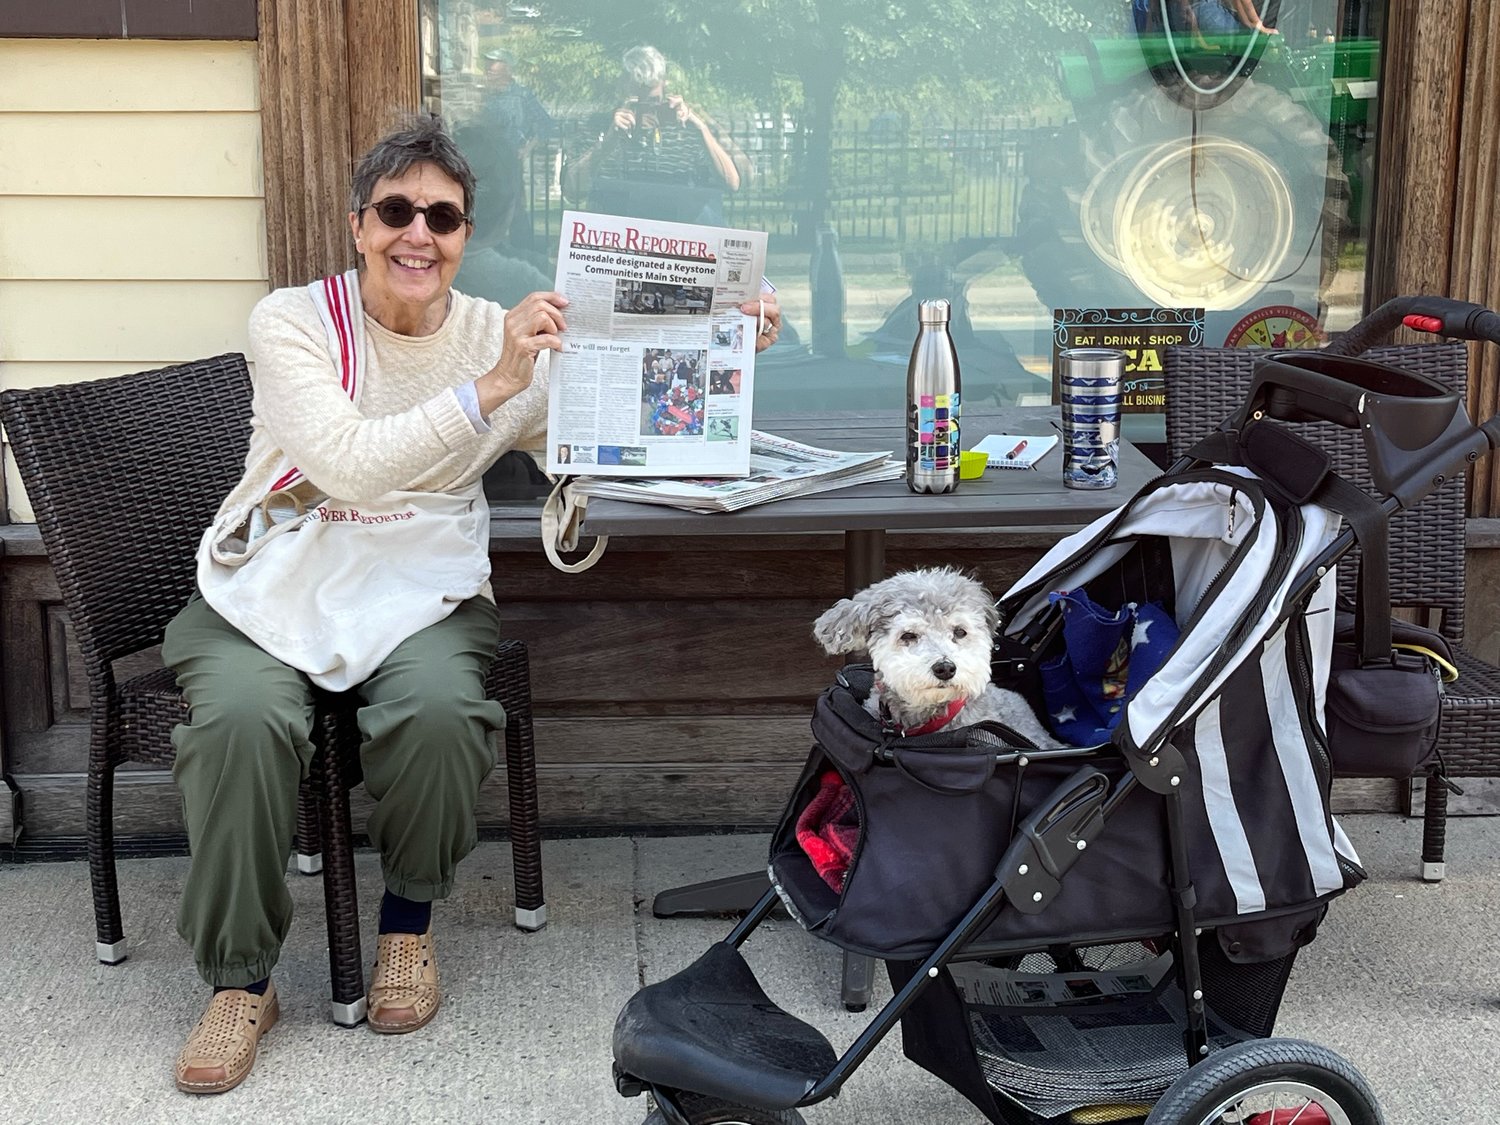 River Reporter sales guru Barbara Winfield joined me and Dharma in handing out papers at the Jamboree.